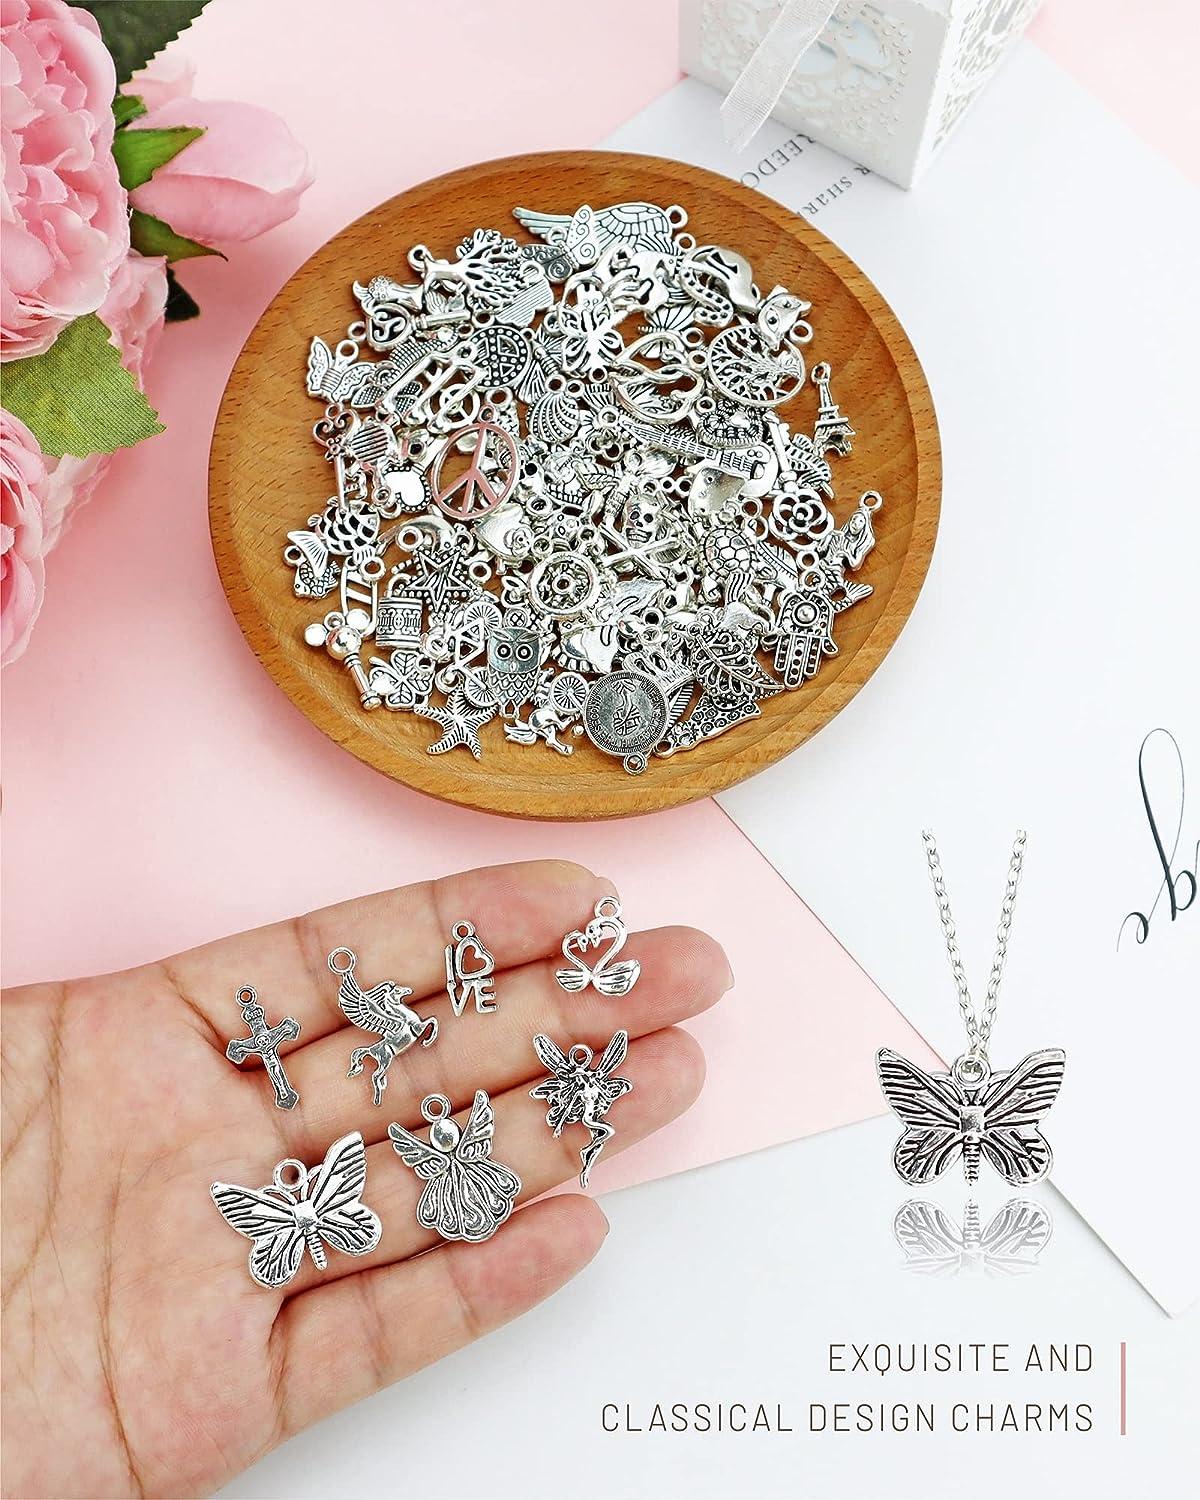 jialeey JIALEEY 100 PCS Wholesale Bulk Lots Jewelry Making Charms Mixed  Antique Silver&Golden Alloy Charms Pendants DIY for Necklace